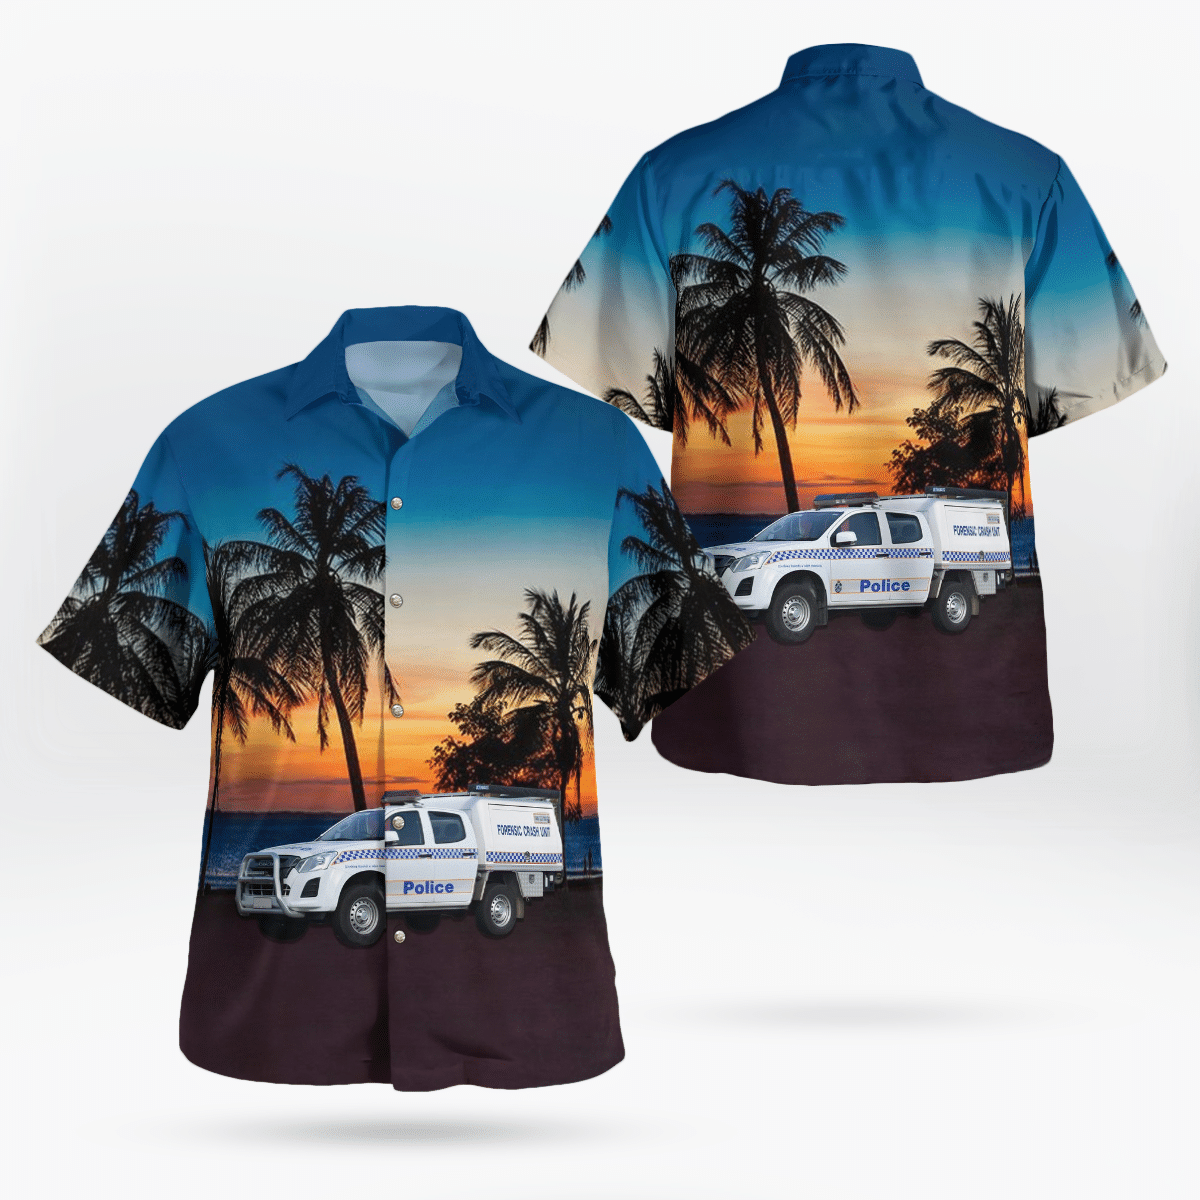 If you want to be noticed, wear These Trendy Hawaiian Shirt 107